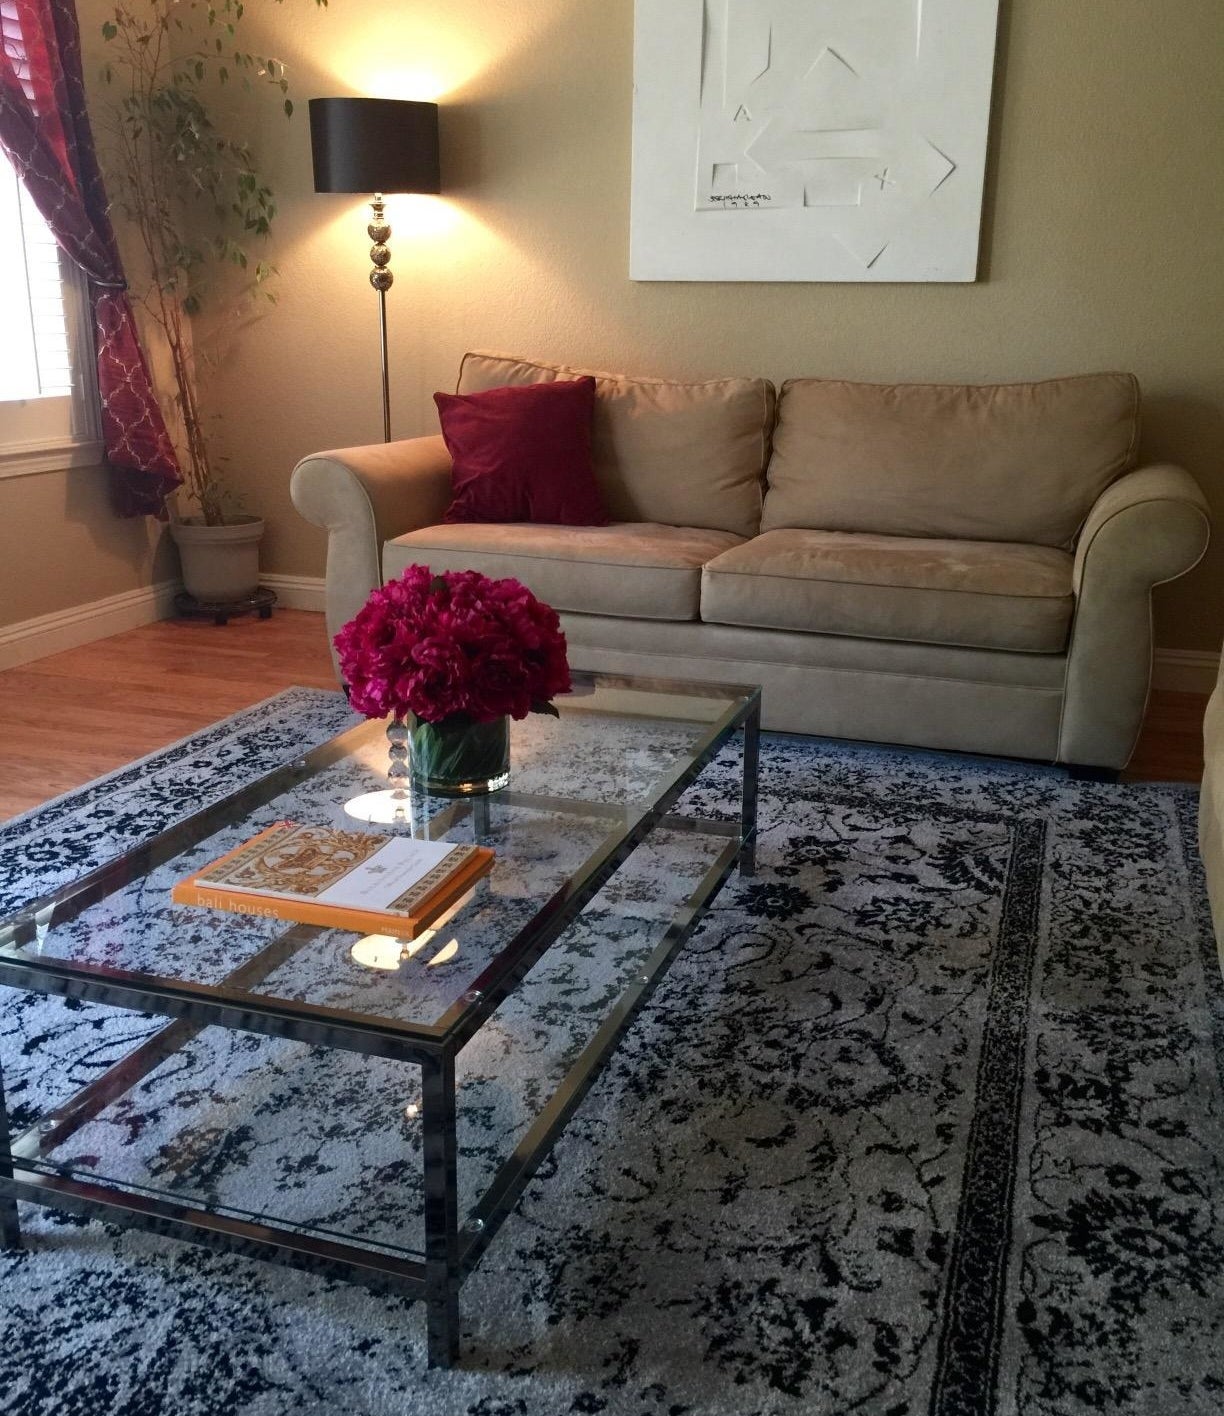 reviewer image of the gray and black rug on their living room floor